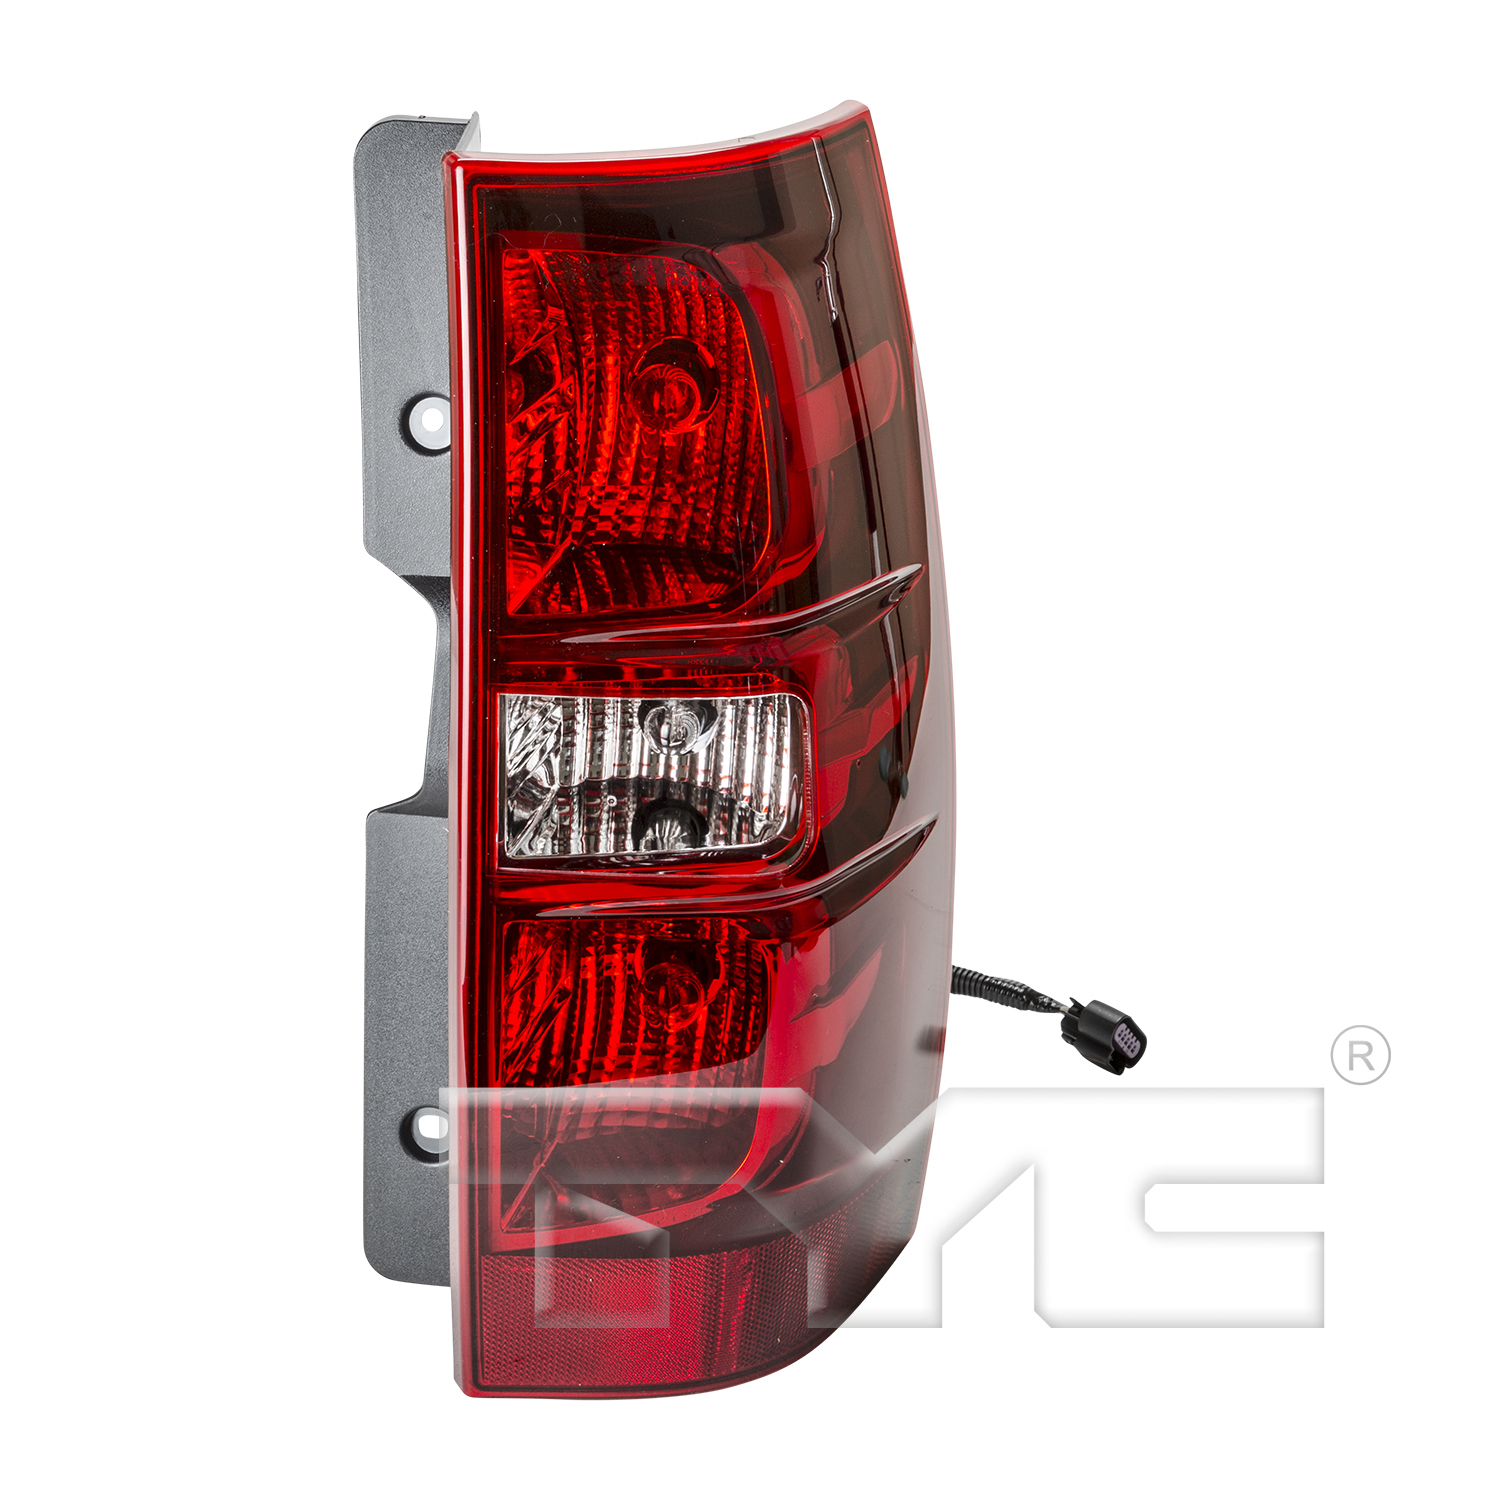 Aftermarket TAILLIGHTS for CHEVROLET - SUBURBAN 2500, SUBURBAN 2500,07-13,RT Taillamp assy